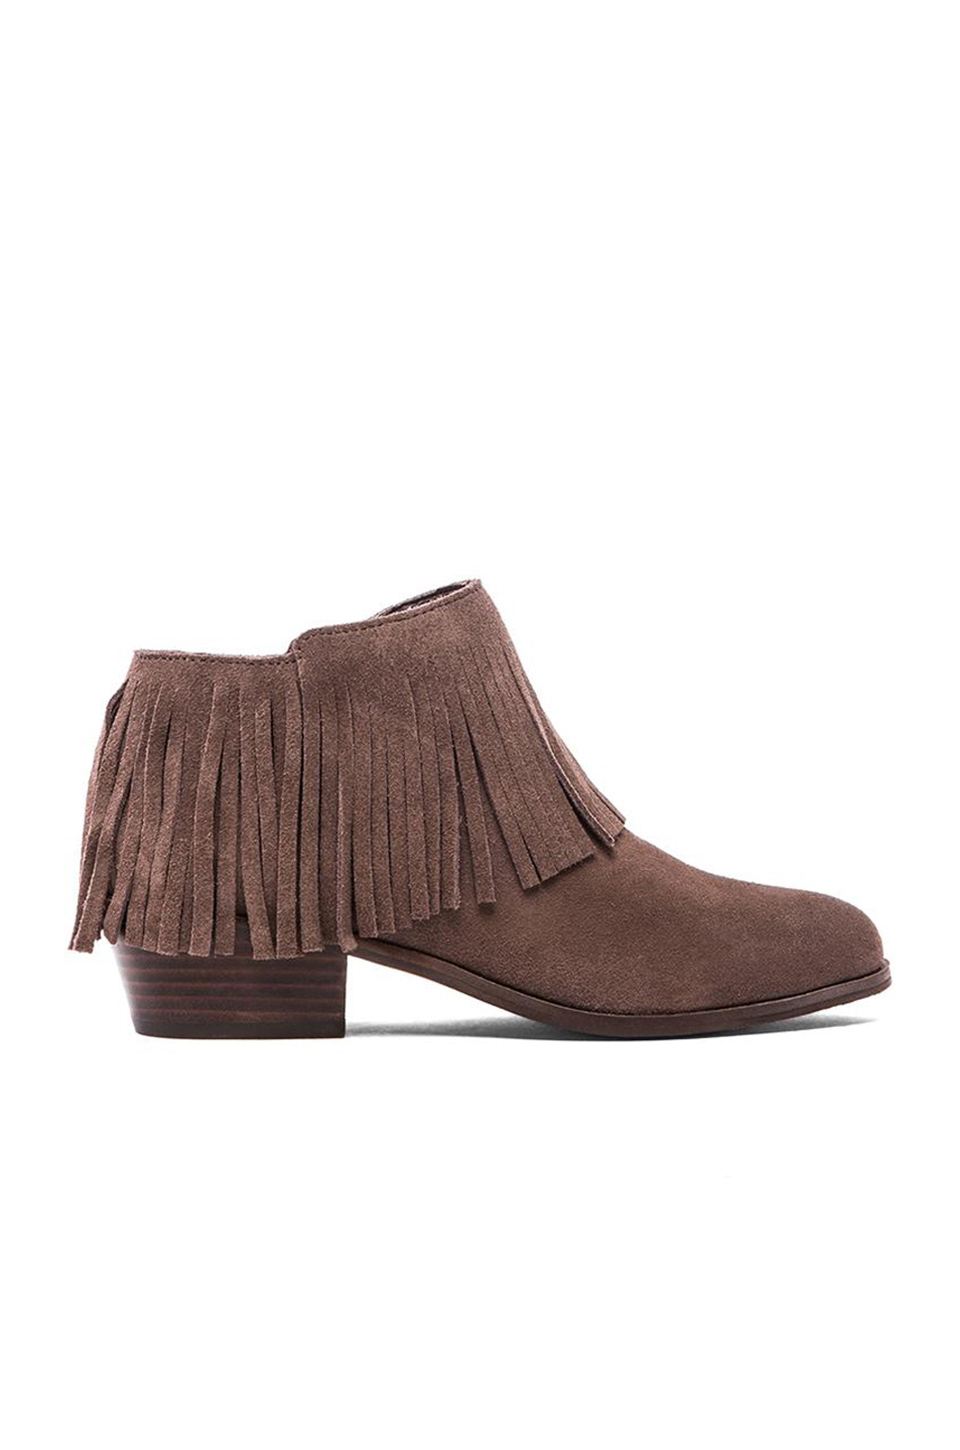 Steve Madden Patzee Bootie in Taupe Suede | REVOLVE